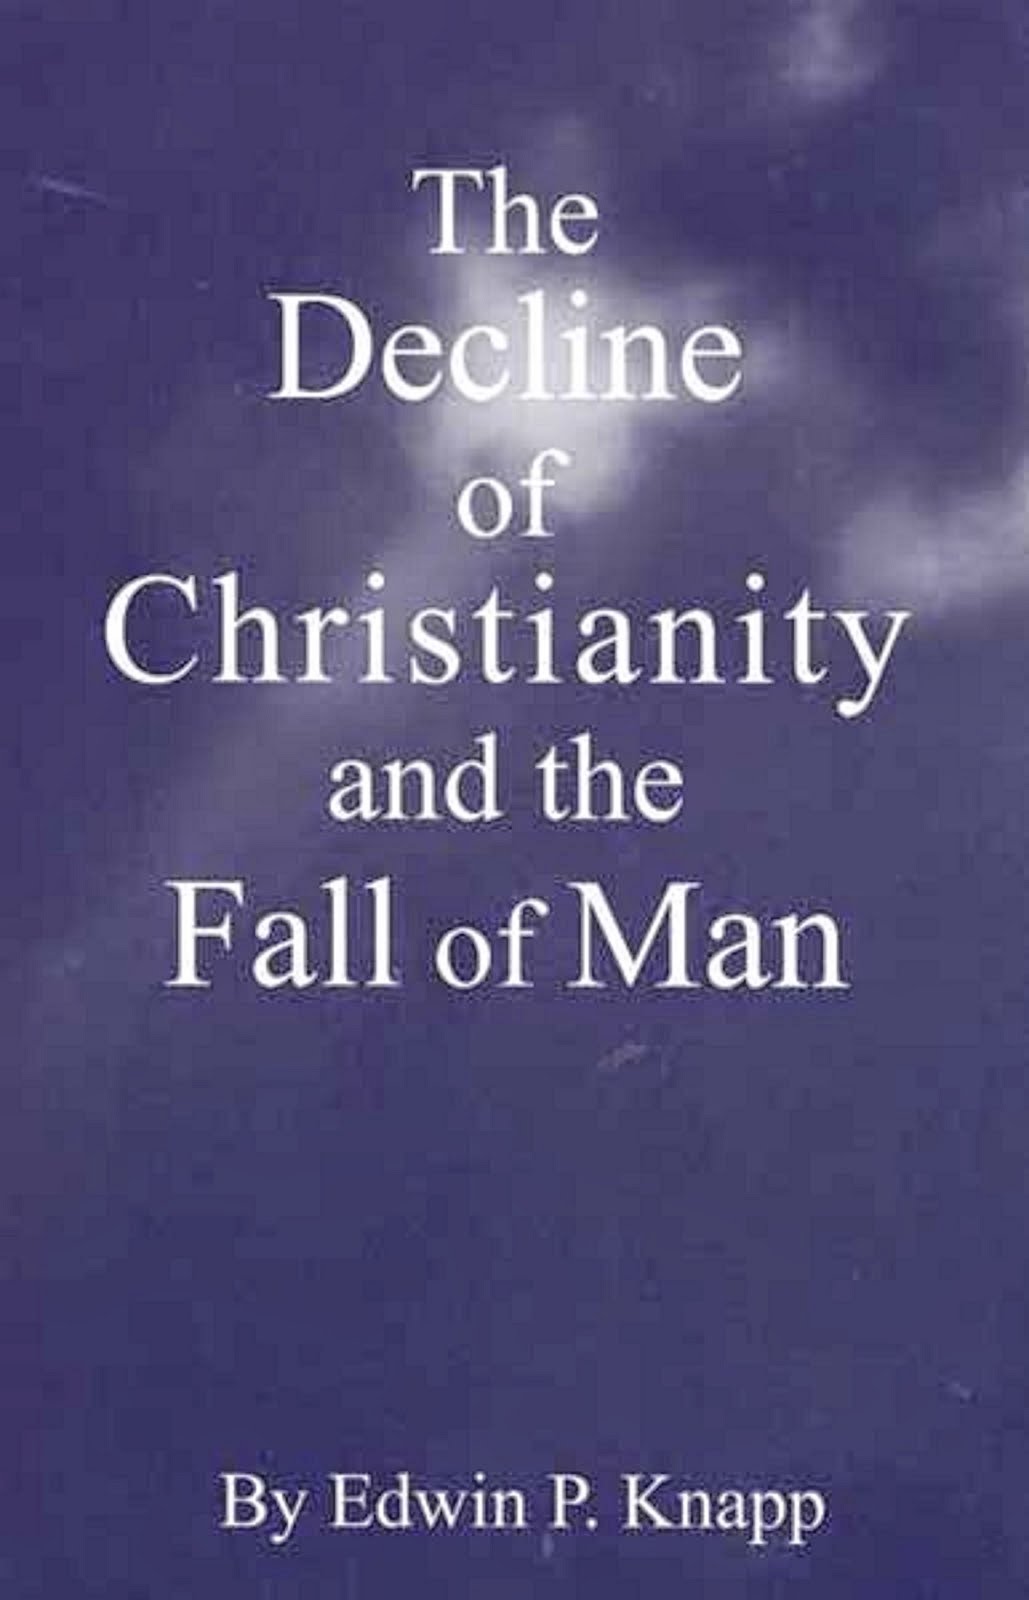 THE DECLINE OF CHRISTIANITY AND THE FALL OF MAN